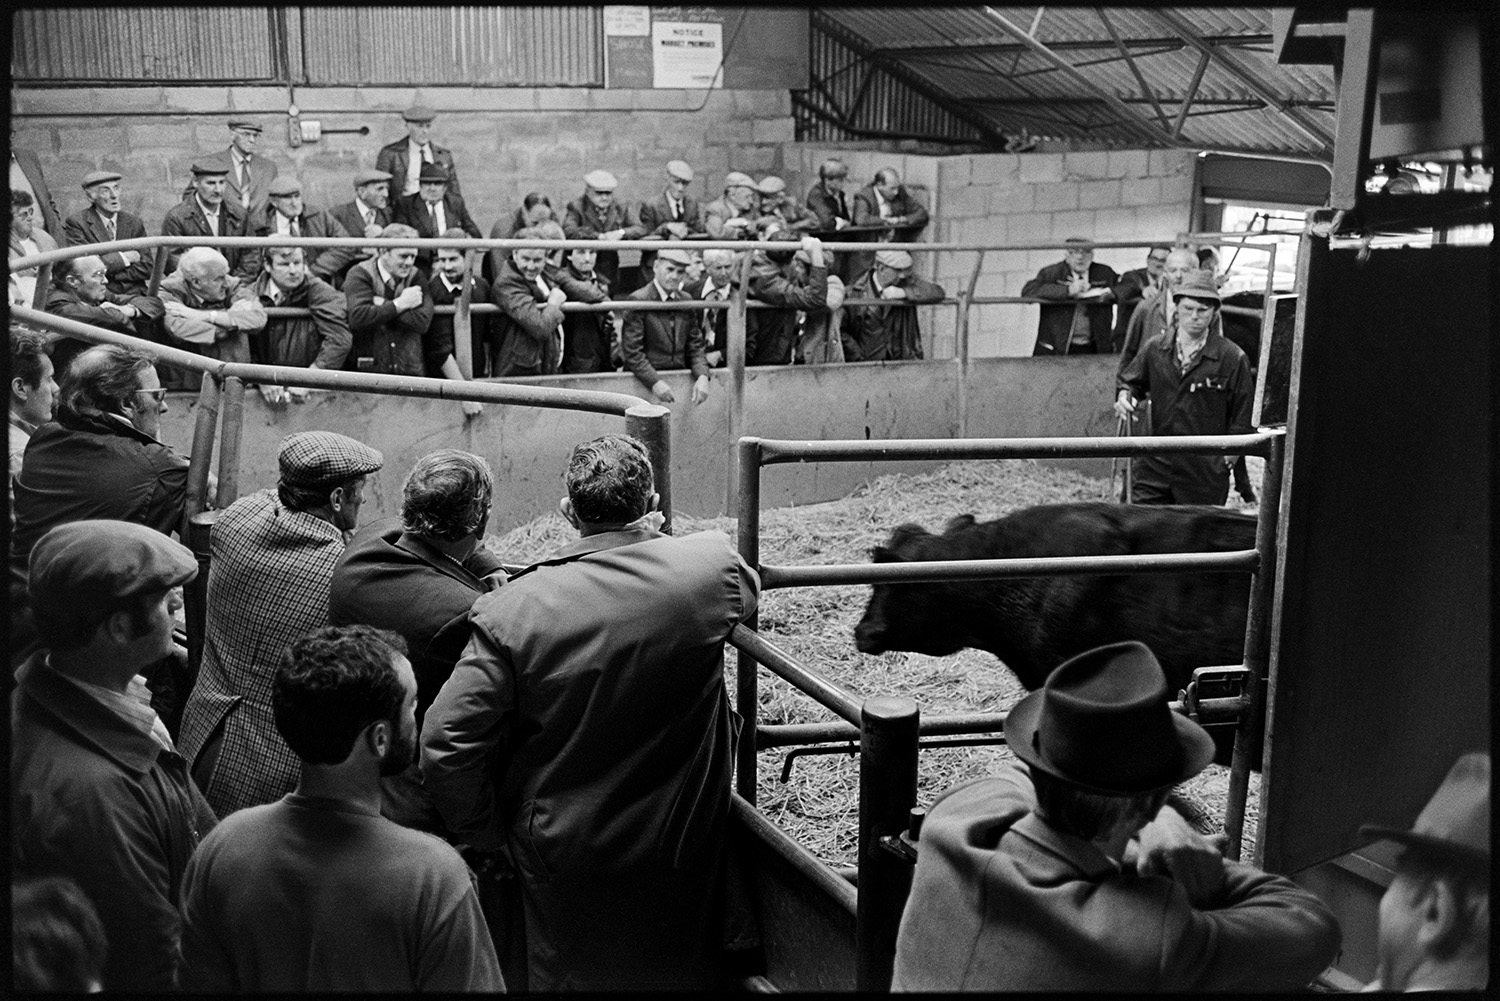 Farmers at market, sheep, cattle being auctioned in ring. 
[Men gathered around the auction ring at Holsworthy Market where a cow is being auctioned.]